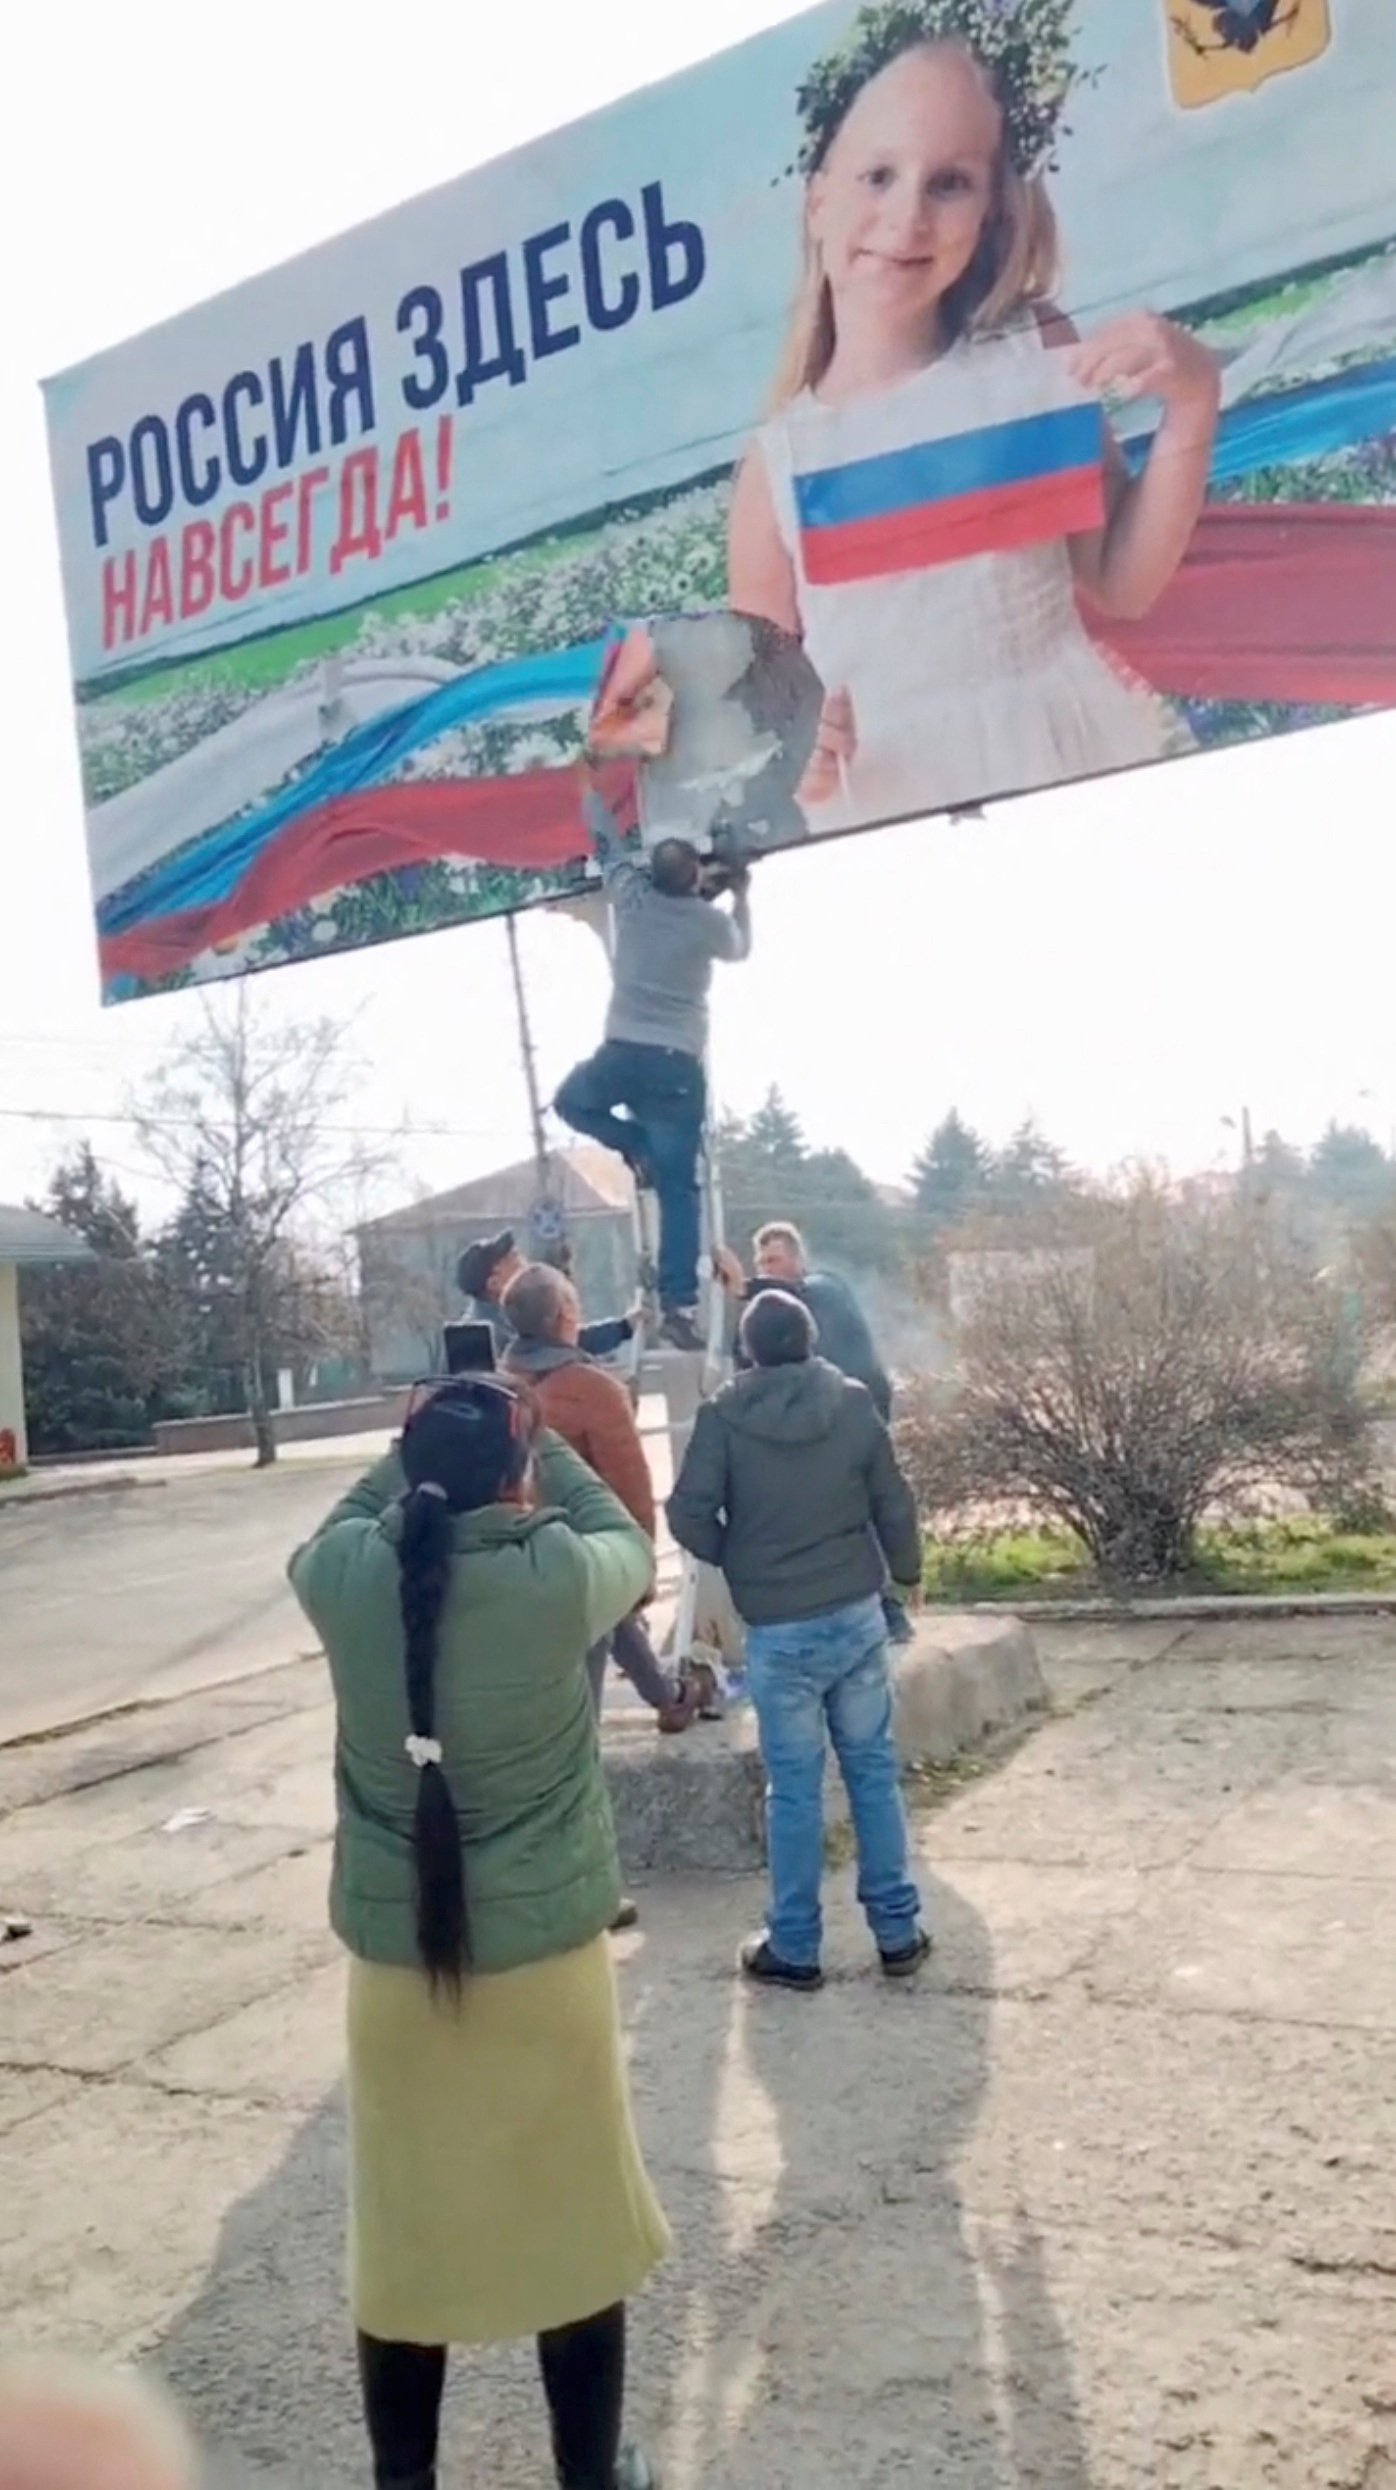 A man tears down a Russian billboard poster in Bilozerka, Kherson Oblast, Ukraine, in this still image obtained from a video released on November 11.